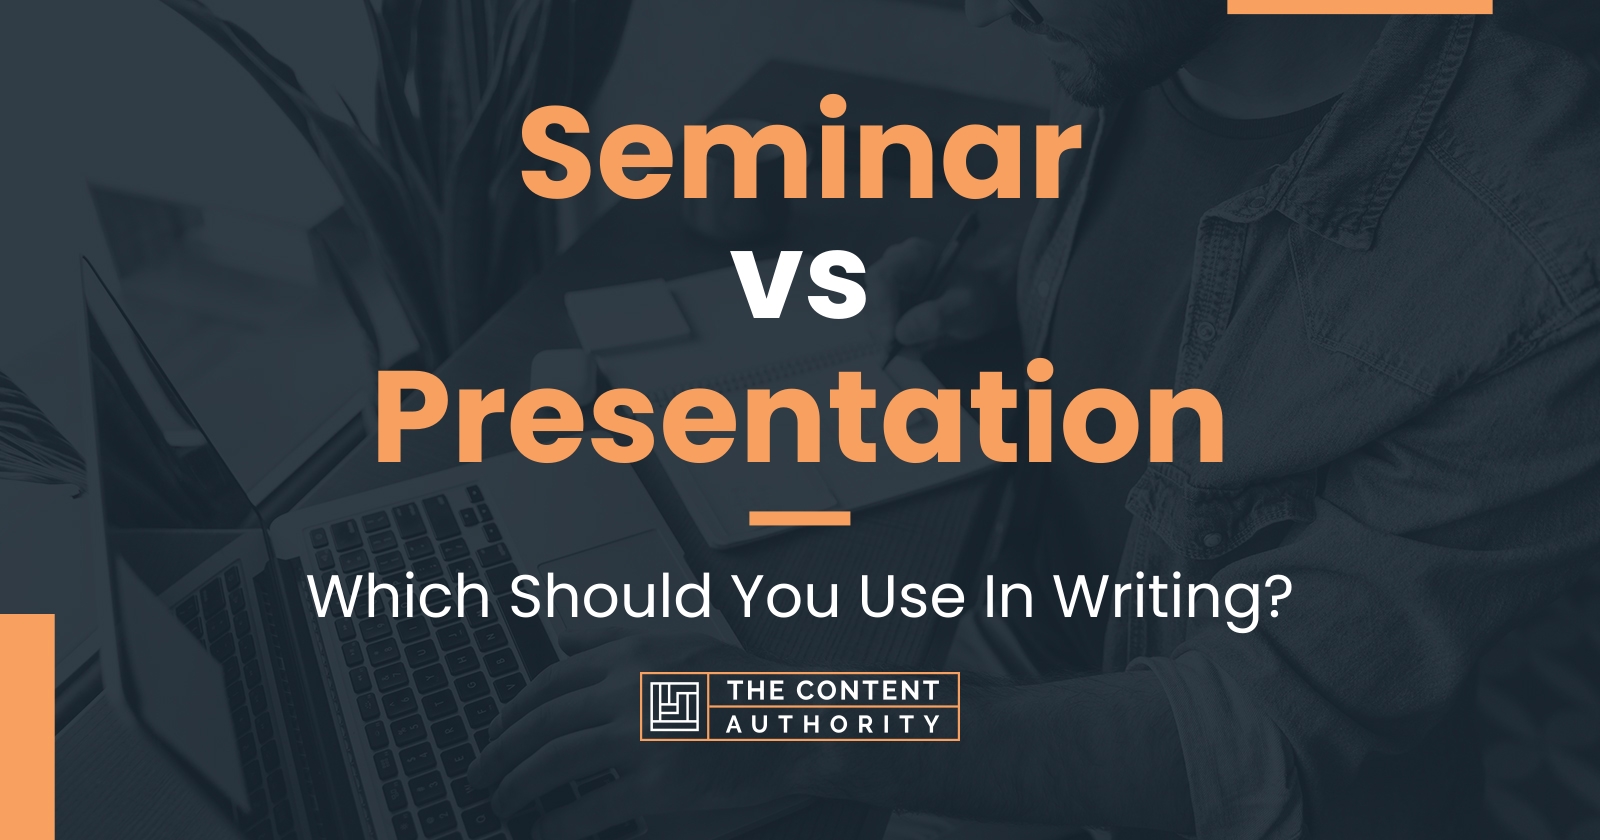 Seminar vs Presentation: Which Should You Use In Writing?